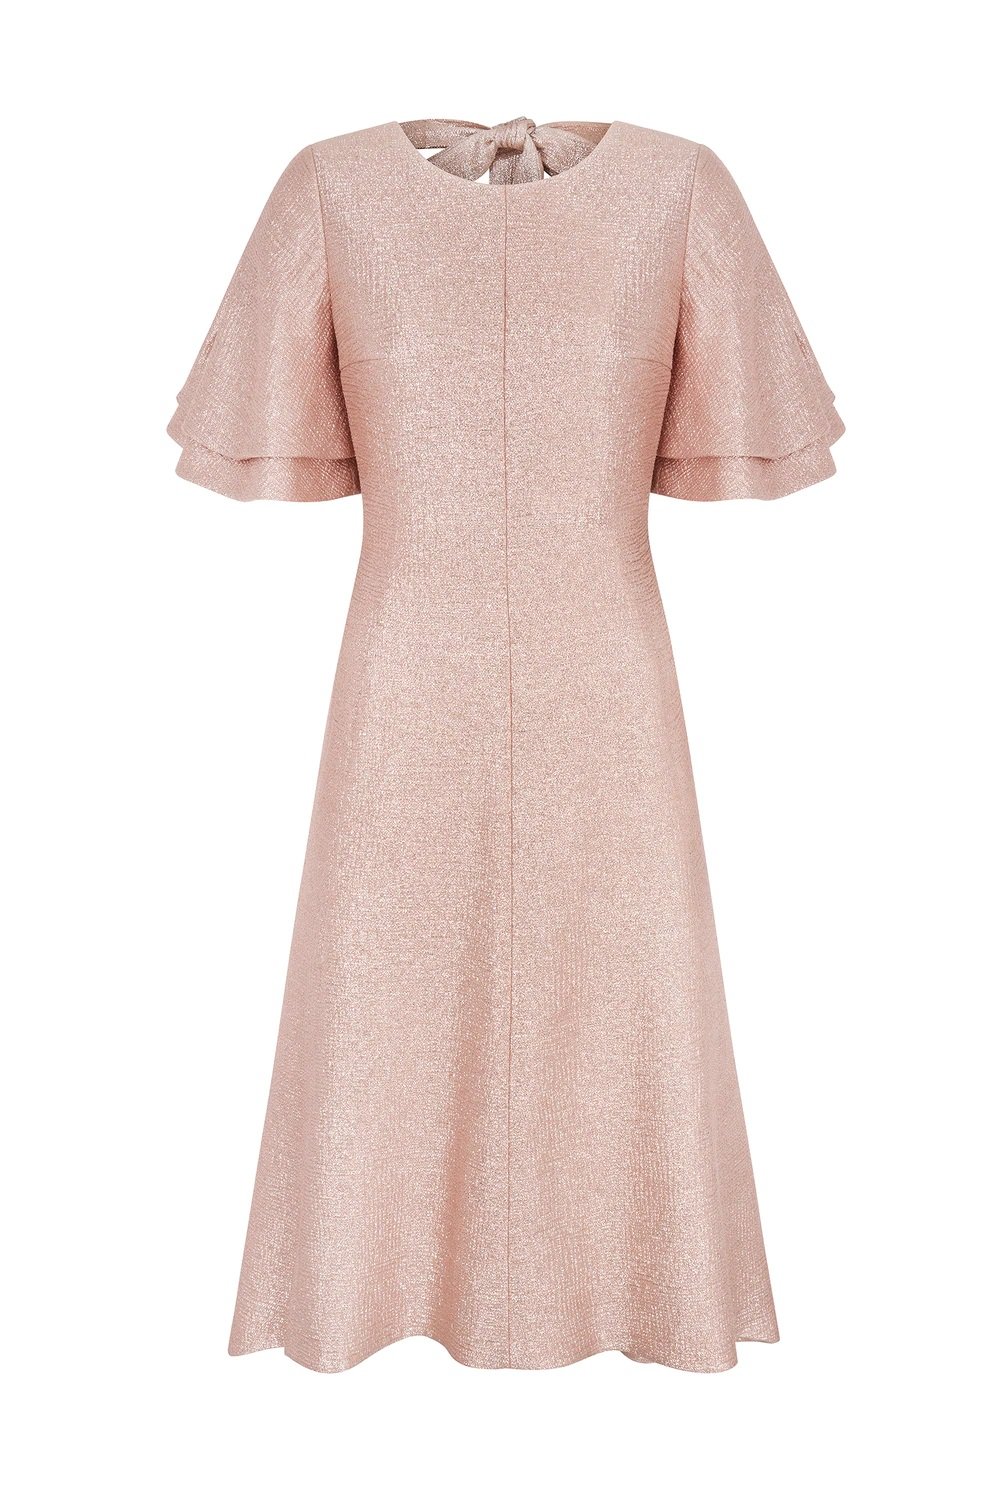 Suzannah Alessia Dress in Rose Gold.jpg